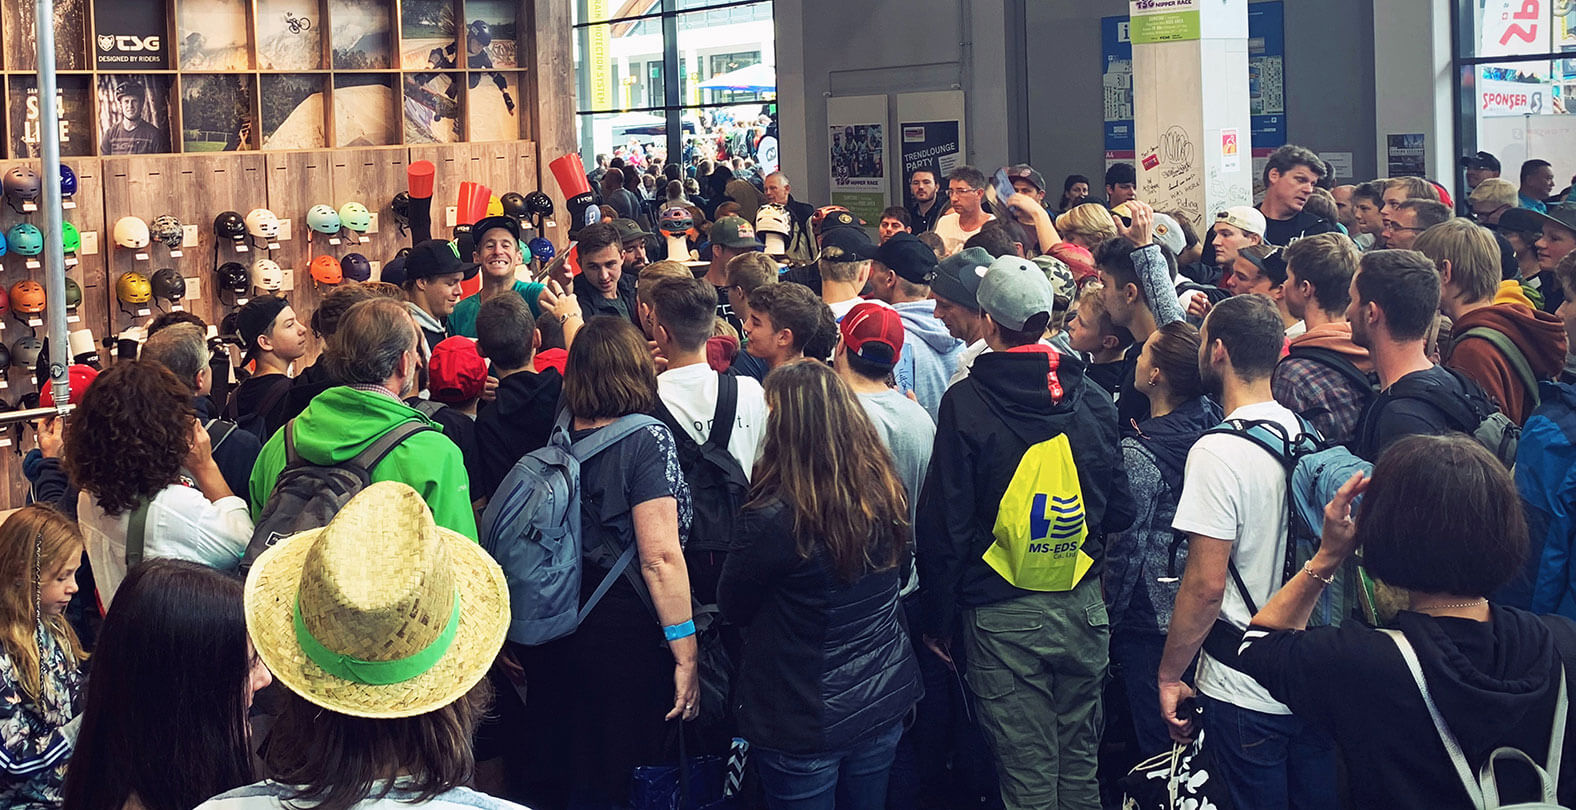 Eurobike 2019 crowded TSG booth during signing session